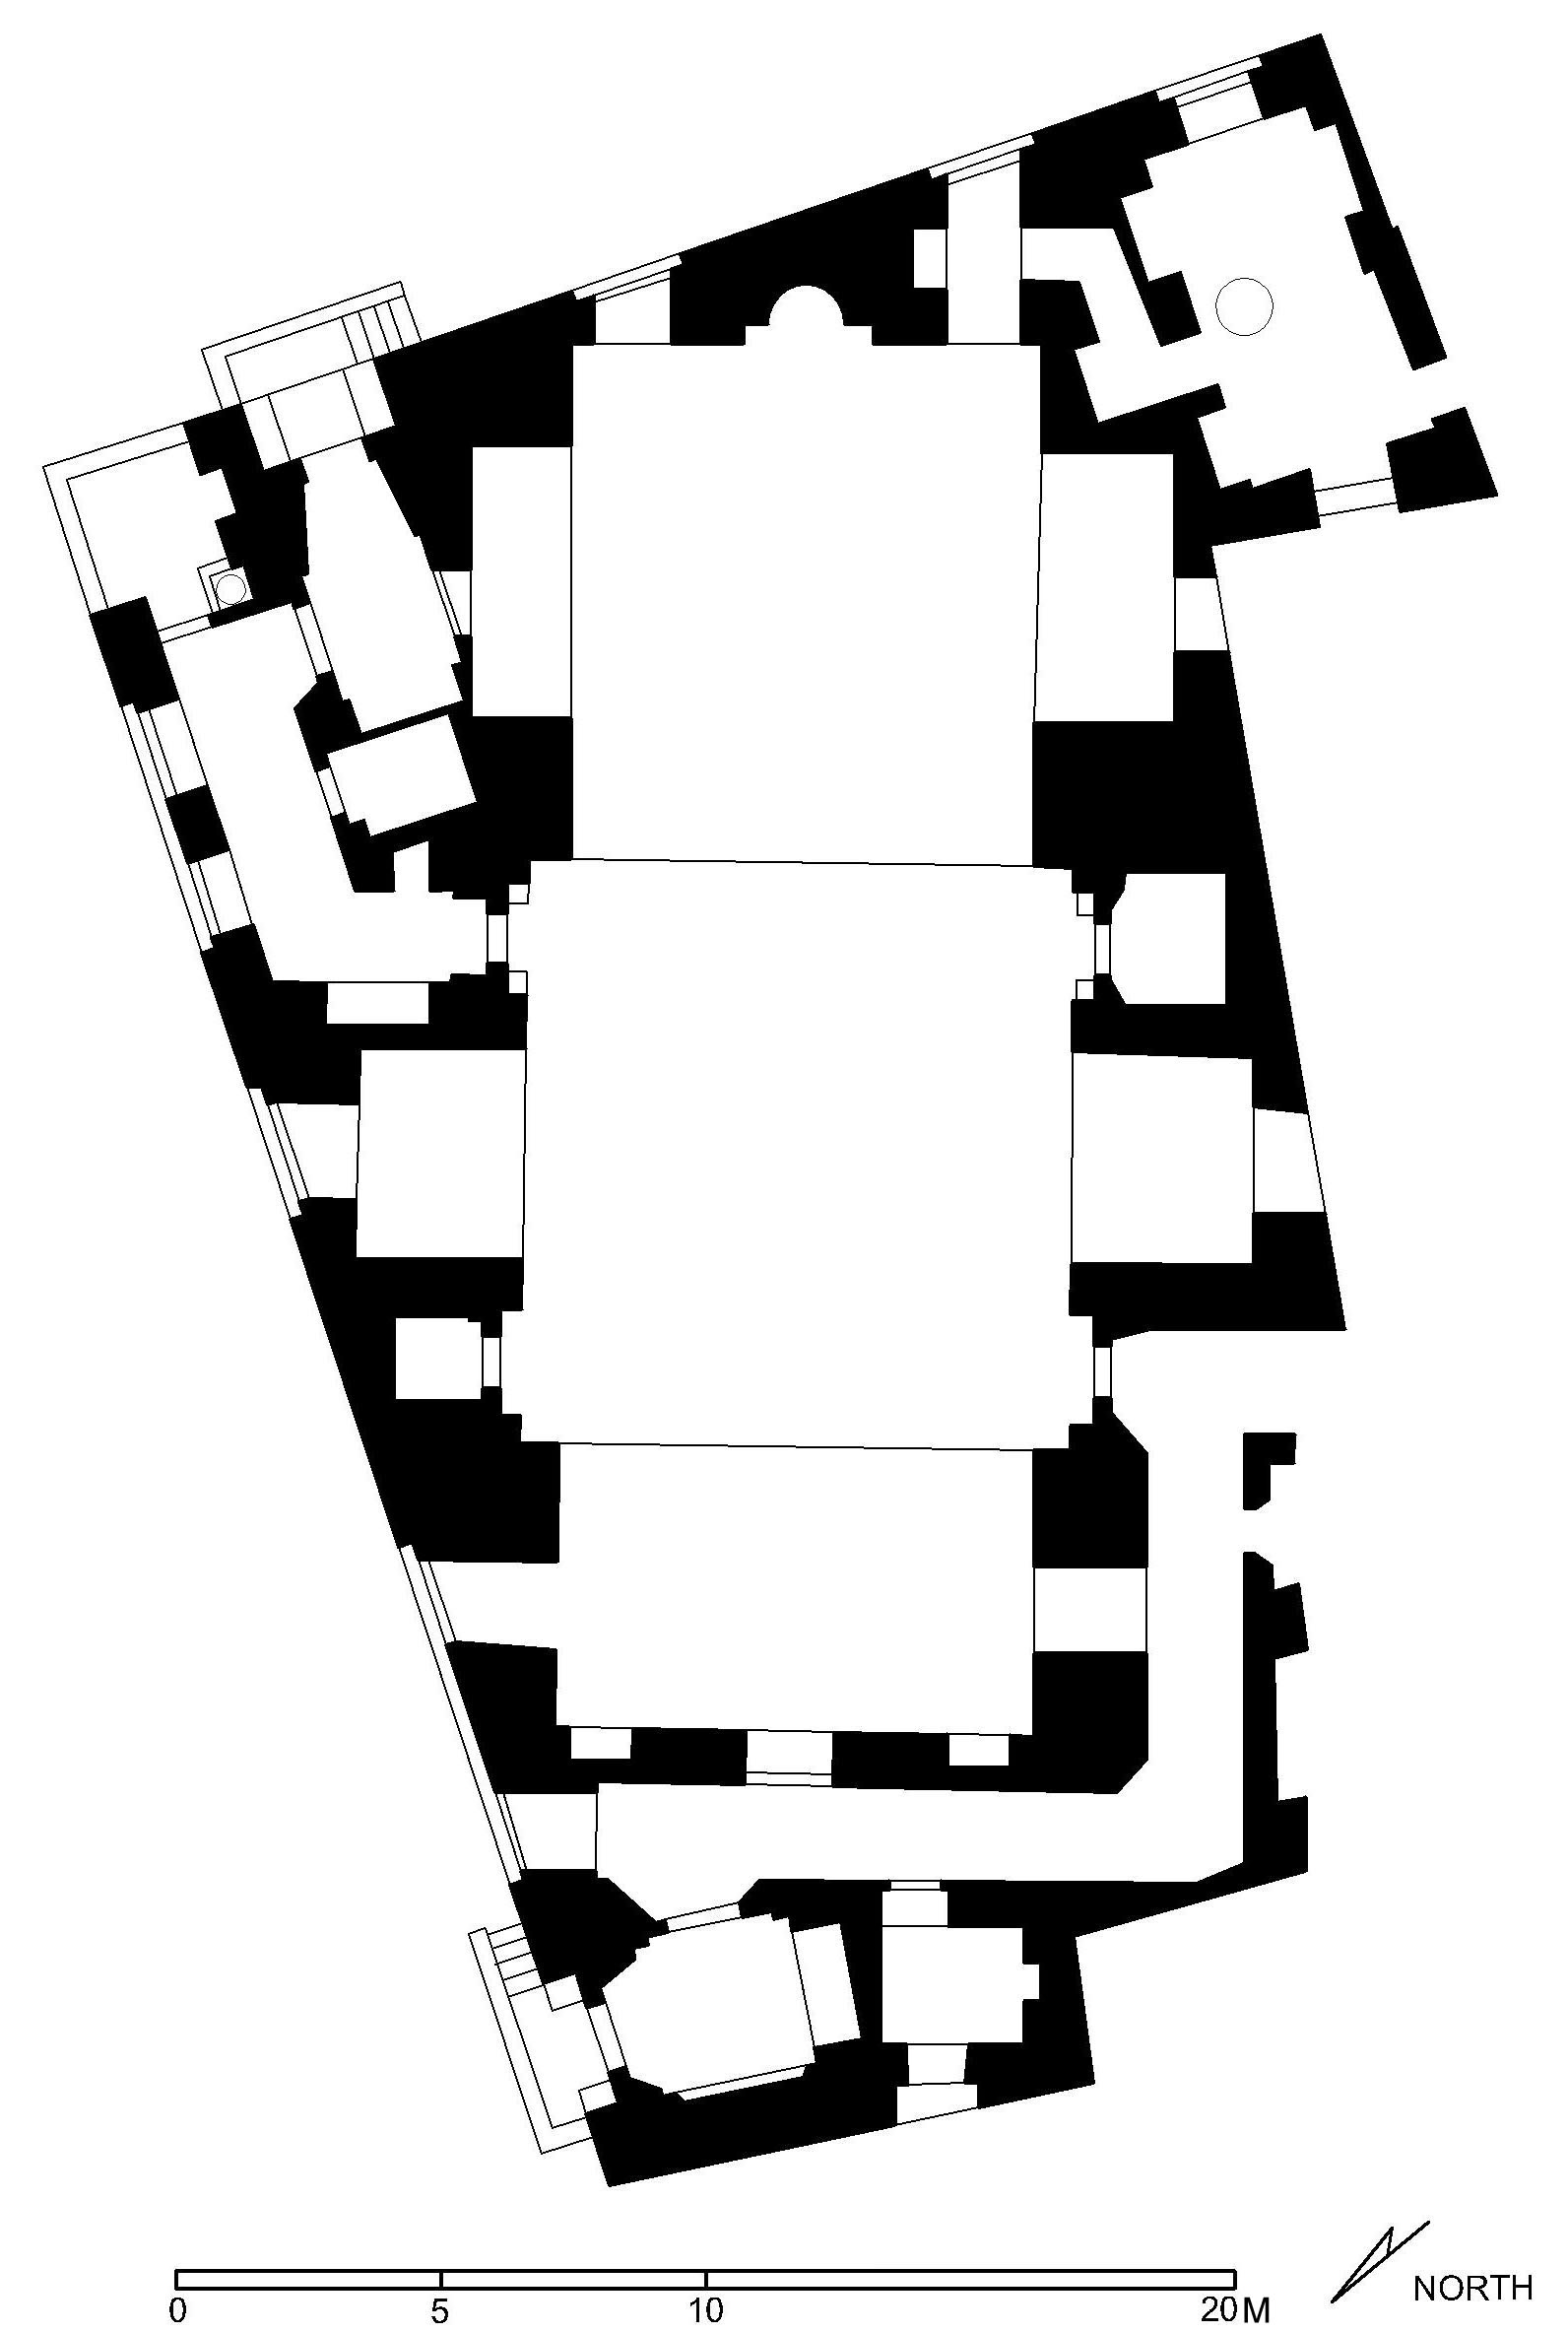 Masjid wa-Madrasa al-Qadi 'Abd al-Basit - Floor plan of complex (after Meinecke) in AutoCAD 2000 format. Click the download button to download a zipped file containing the .dwg file.